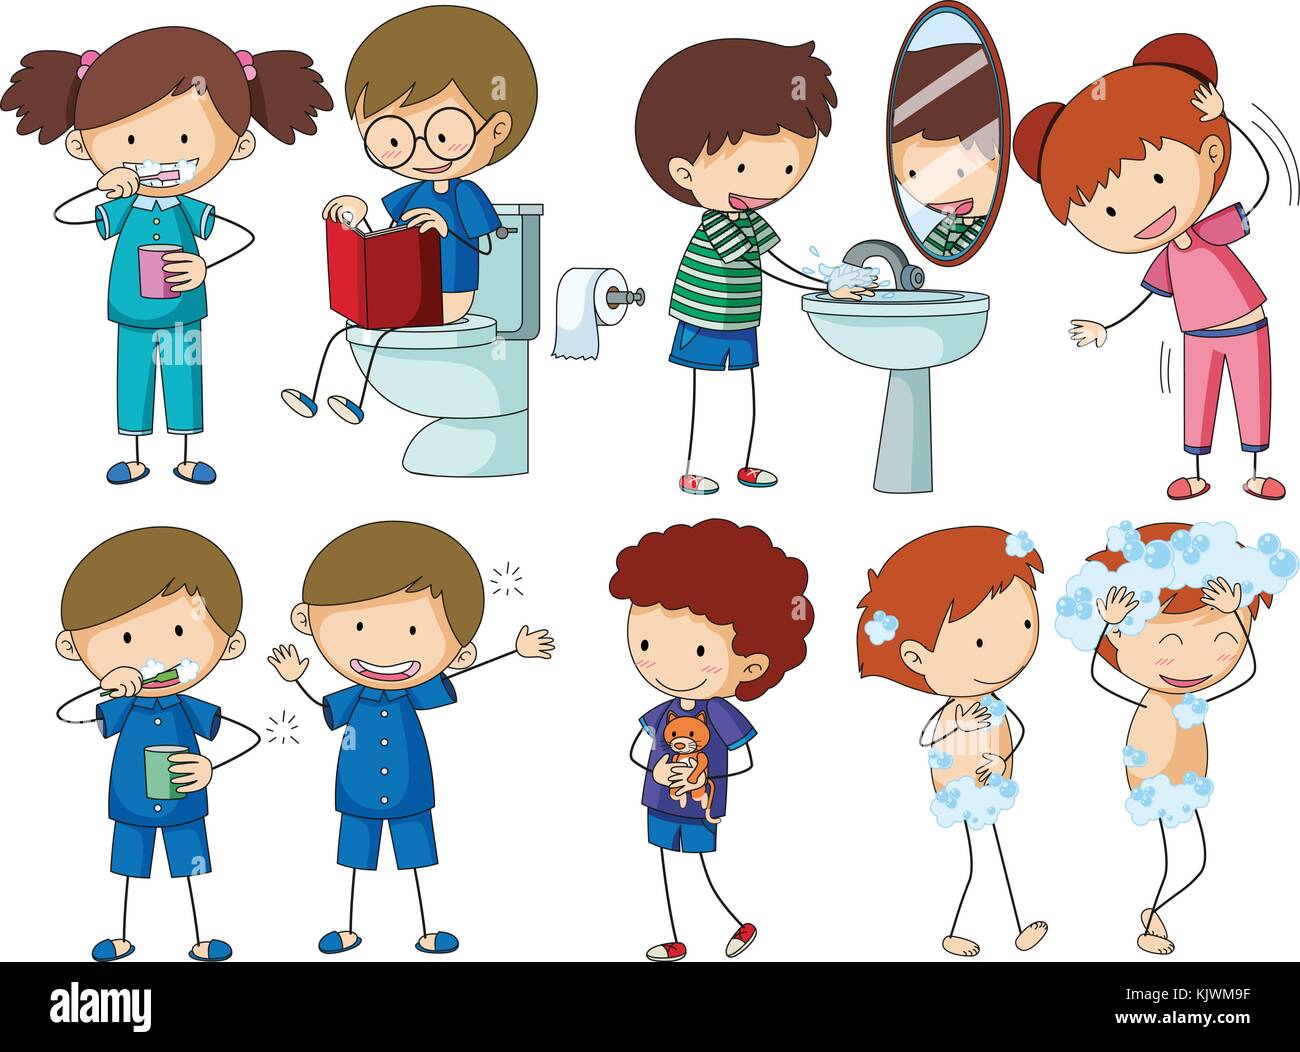 Boys and girls doing different routines illustration Stock Vector